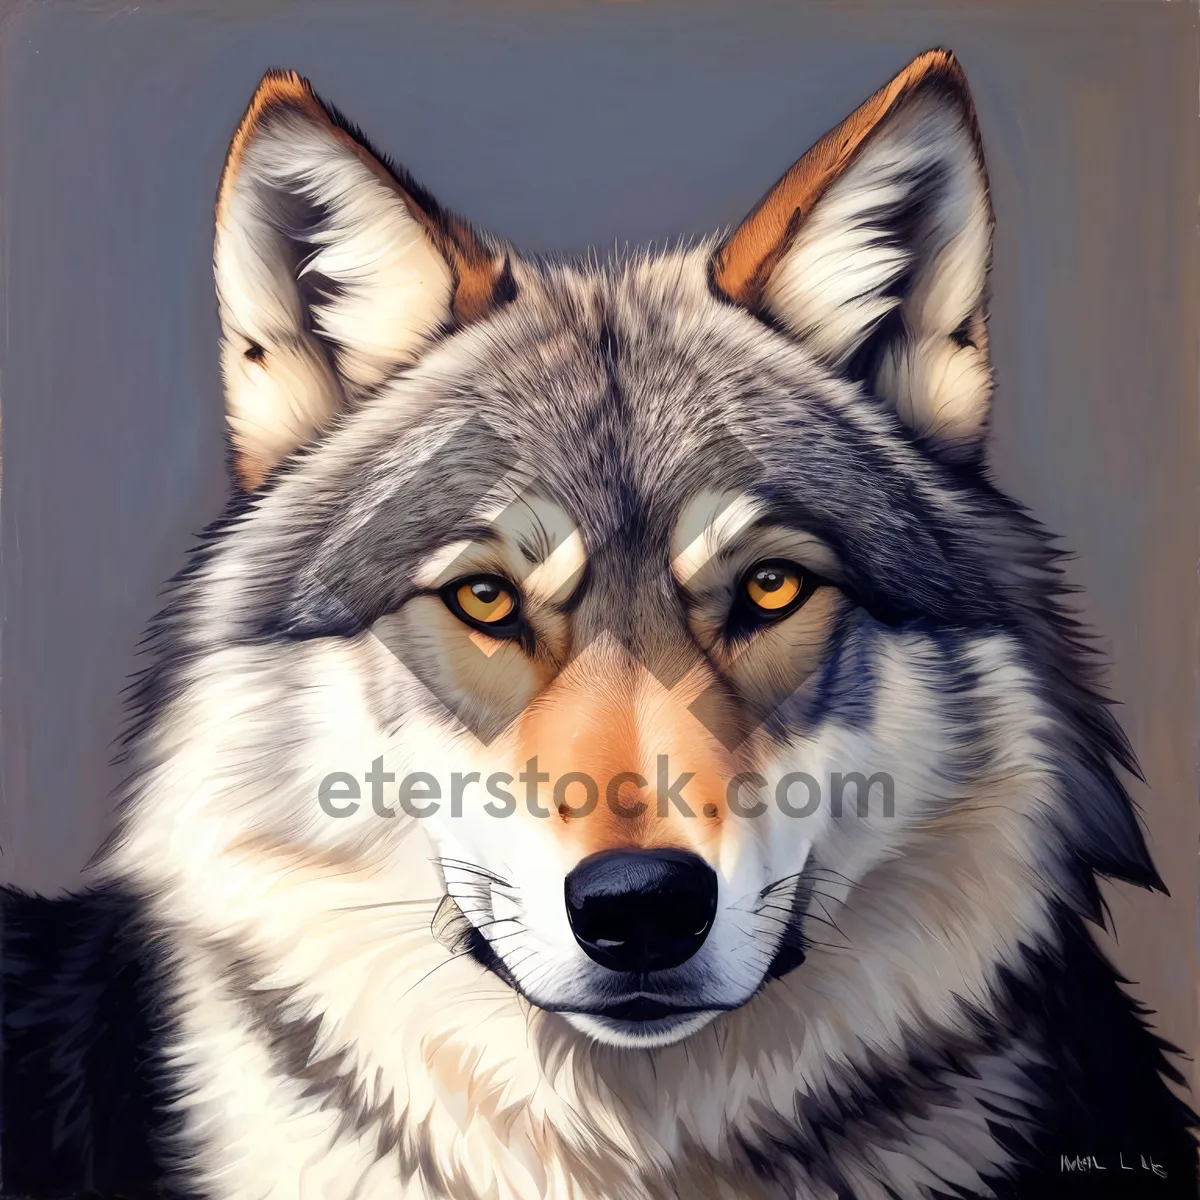 Picture of Majestic Malamute: A Purebred Sled Dog with Piercing Eyes